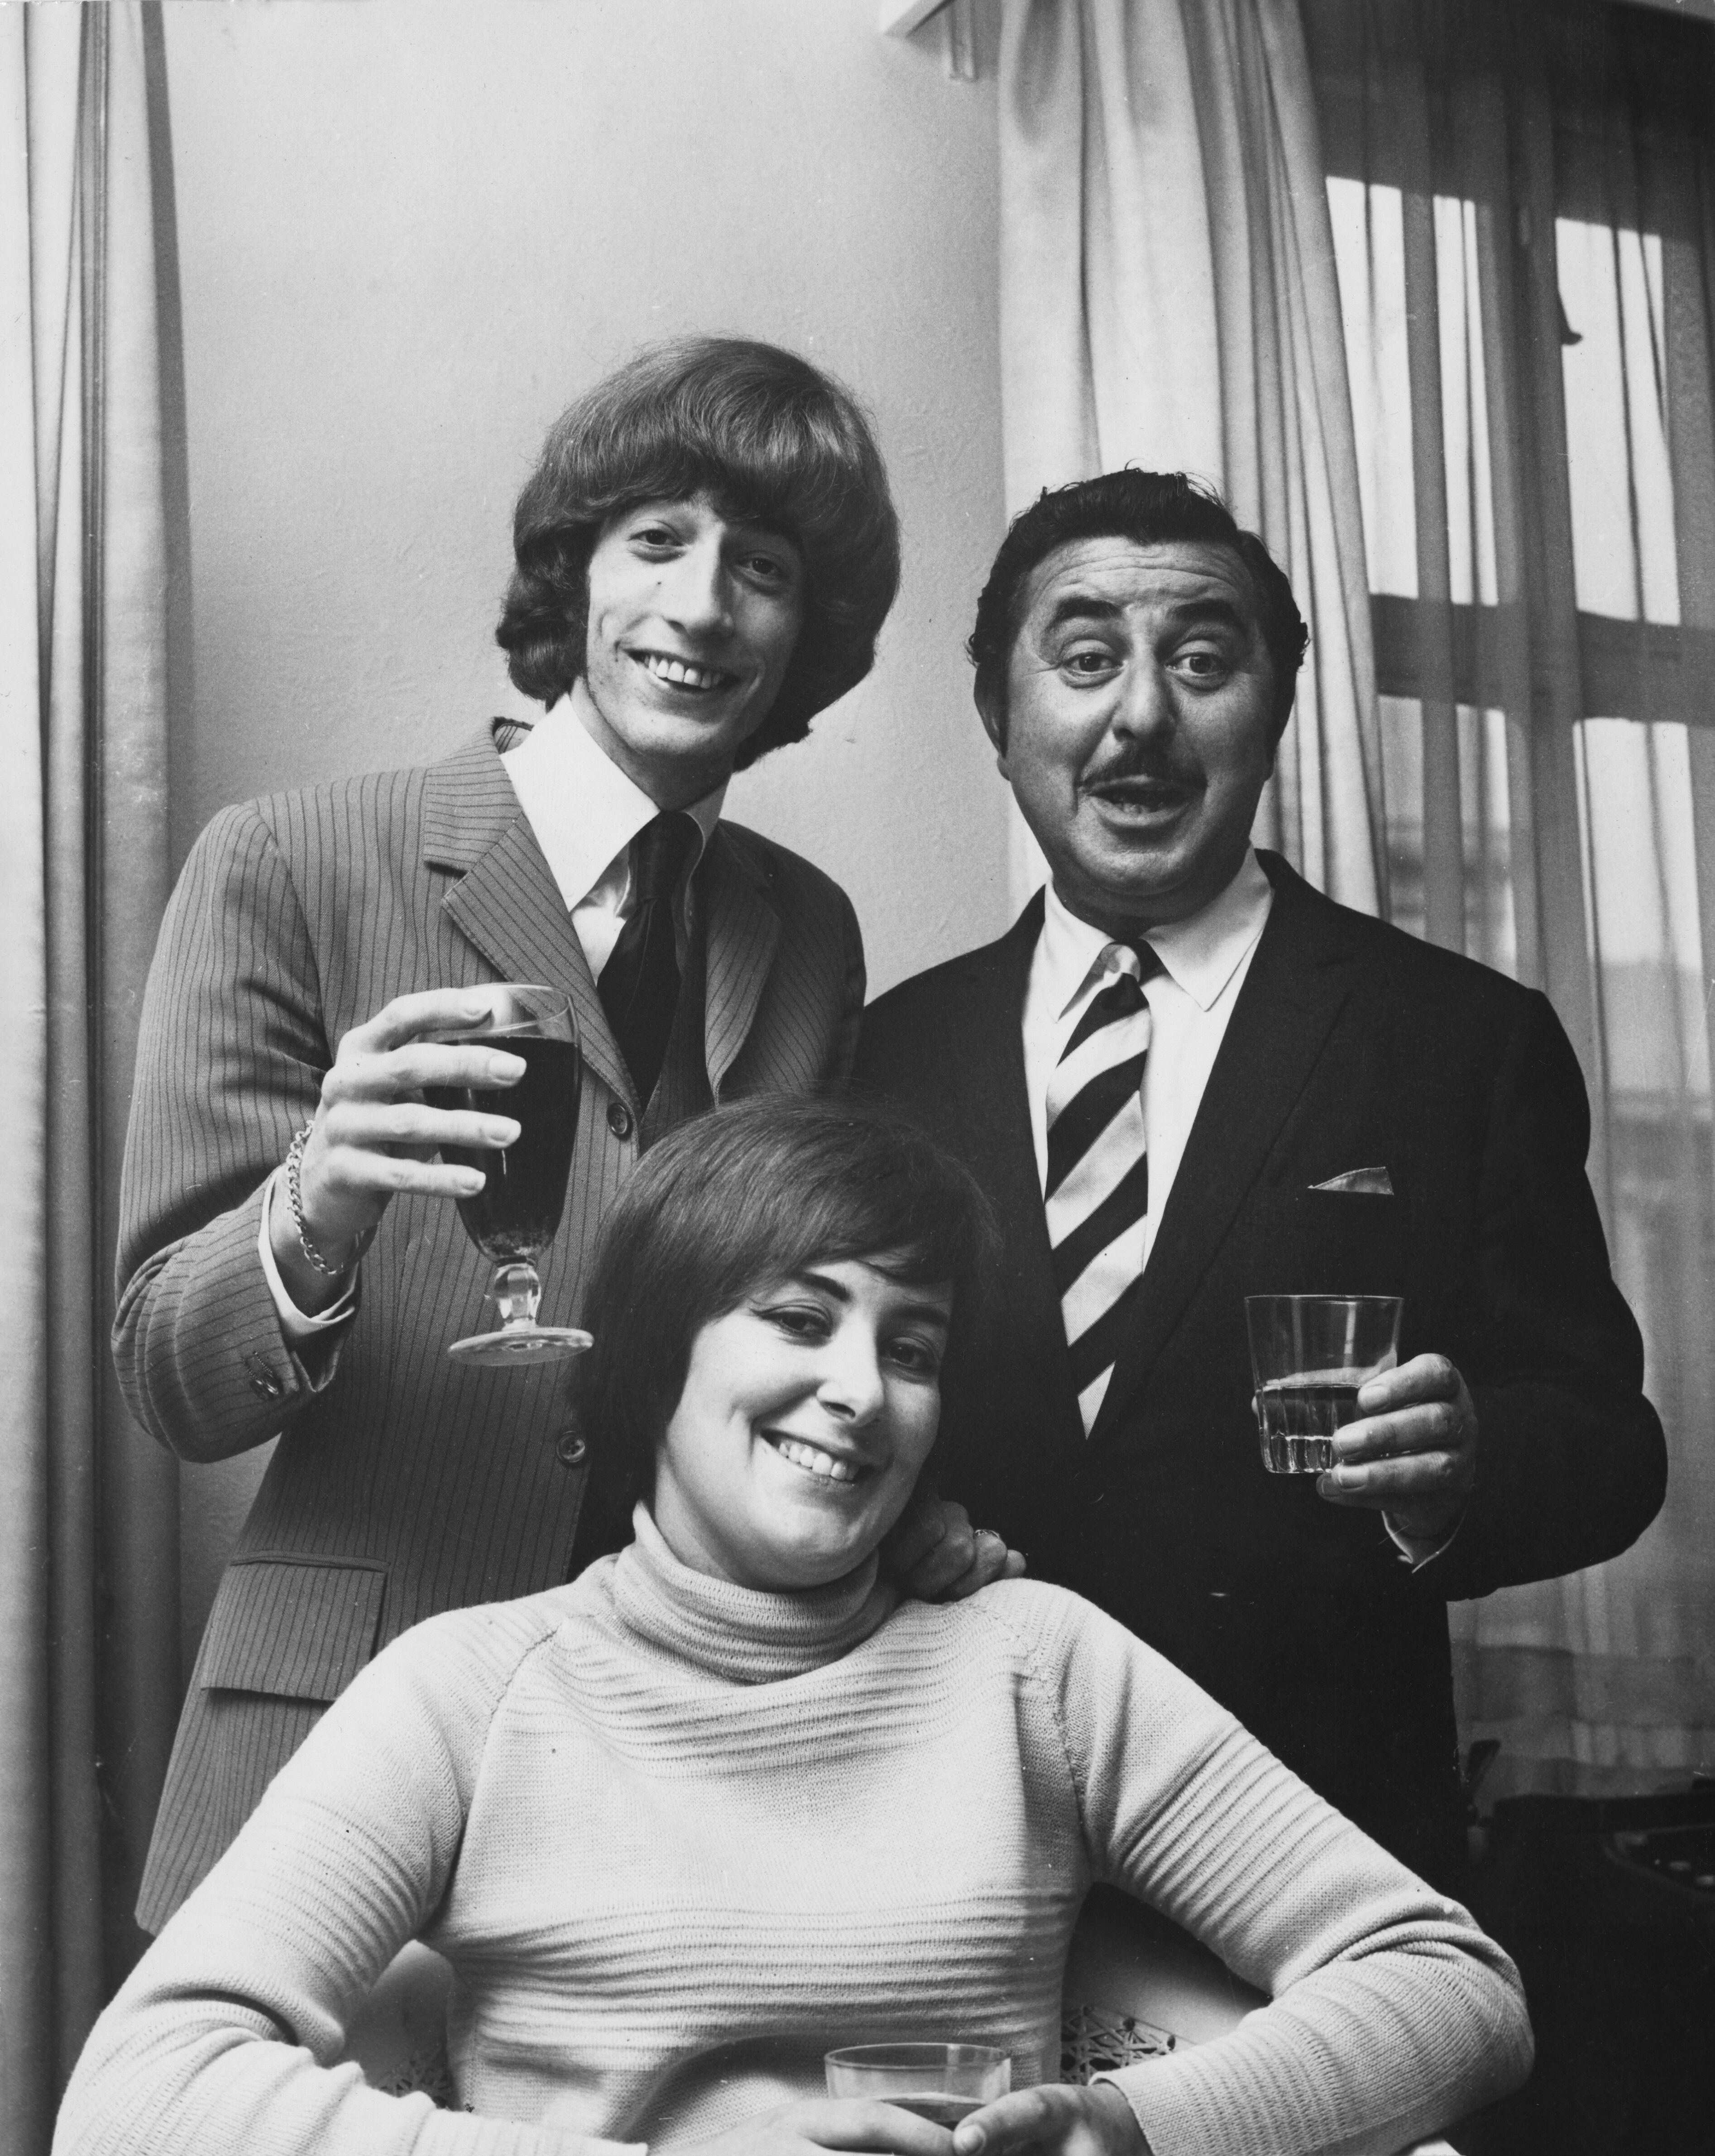 Robin Gibb with his first wife, Molly, and managing director of NEMS Enterprises, Vic Lewis, celebrating Gibb's signing of a contract with NEMS, 5th September 1969. | Source: Getty Images